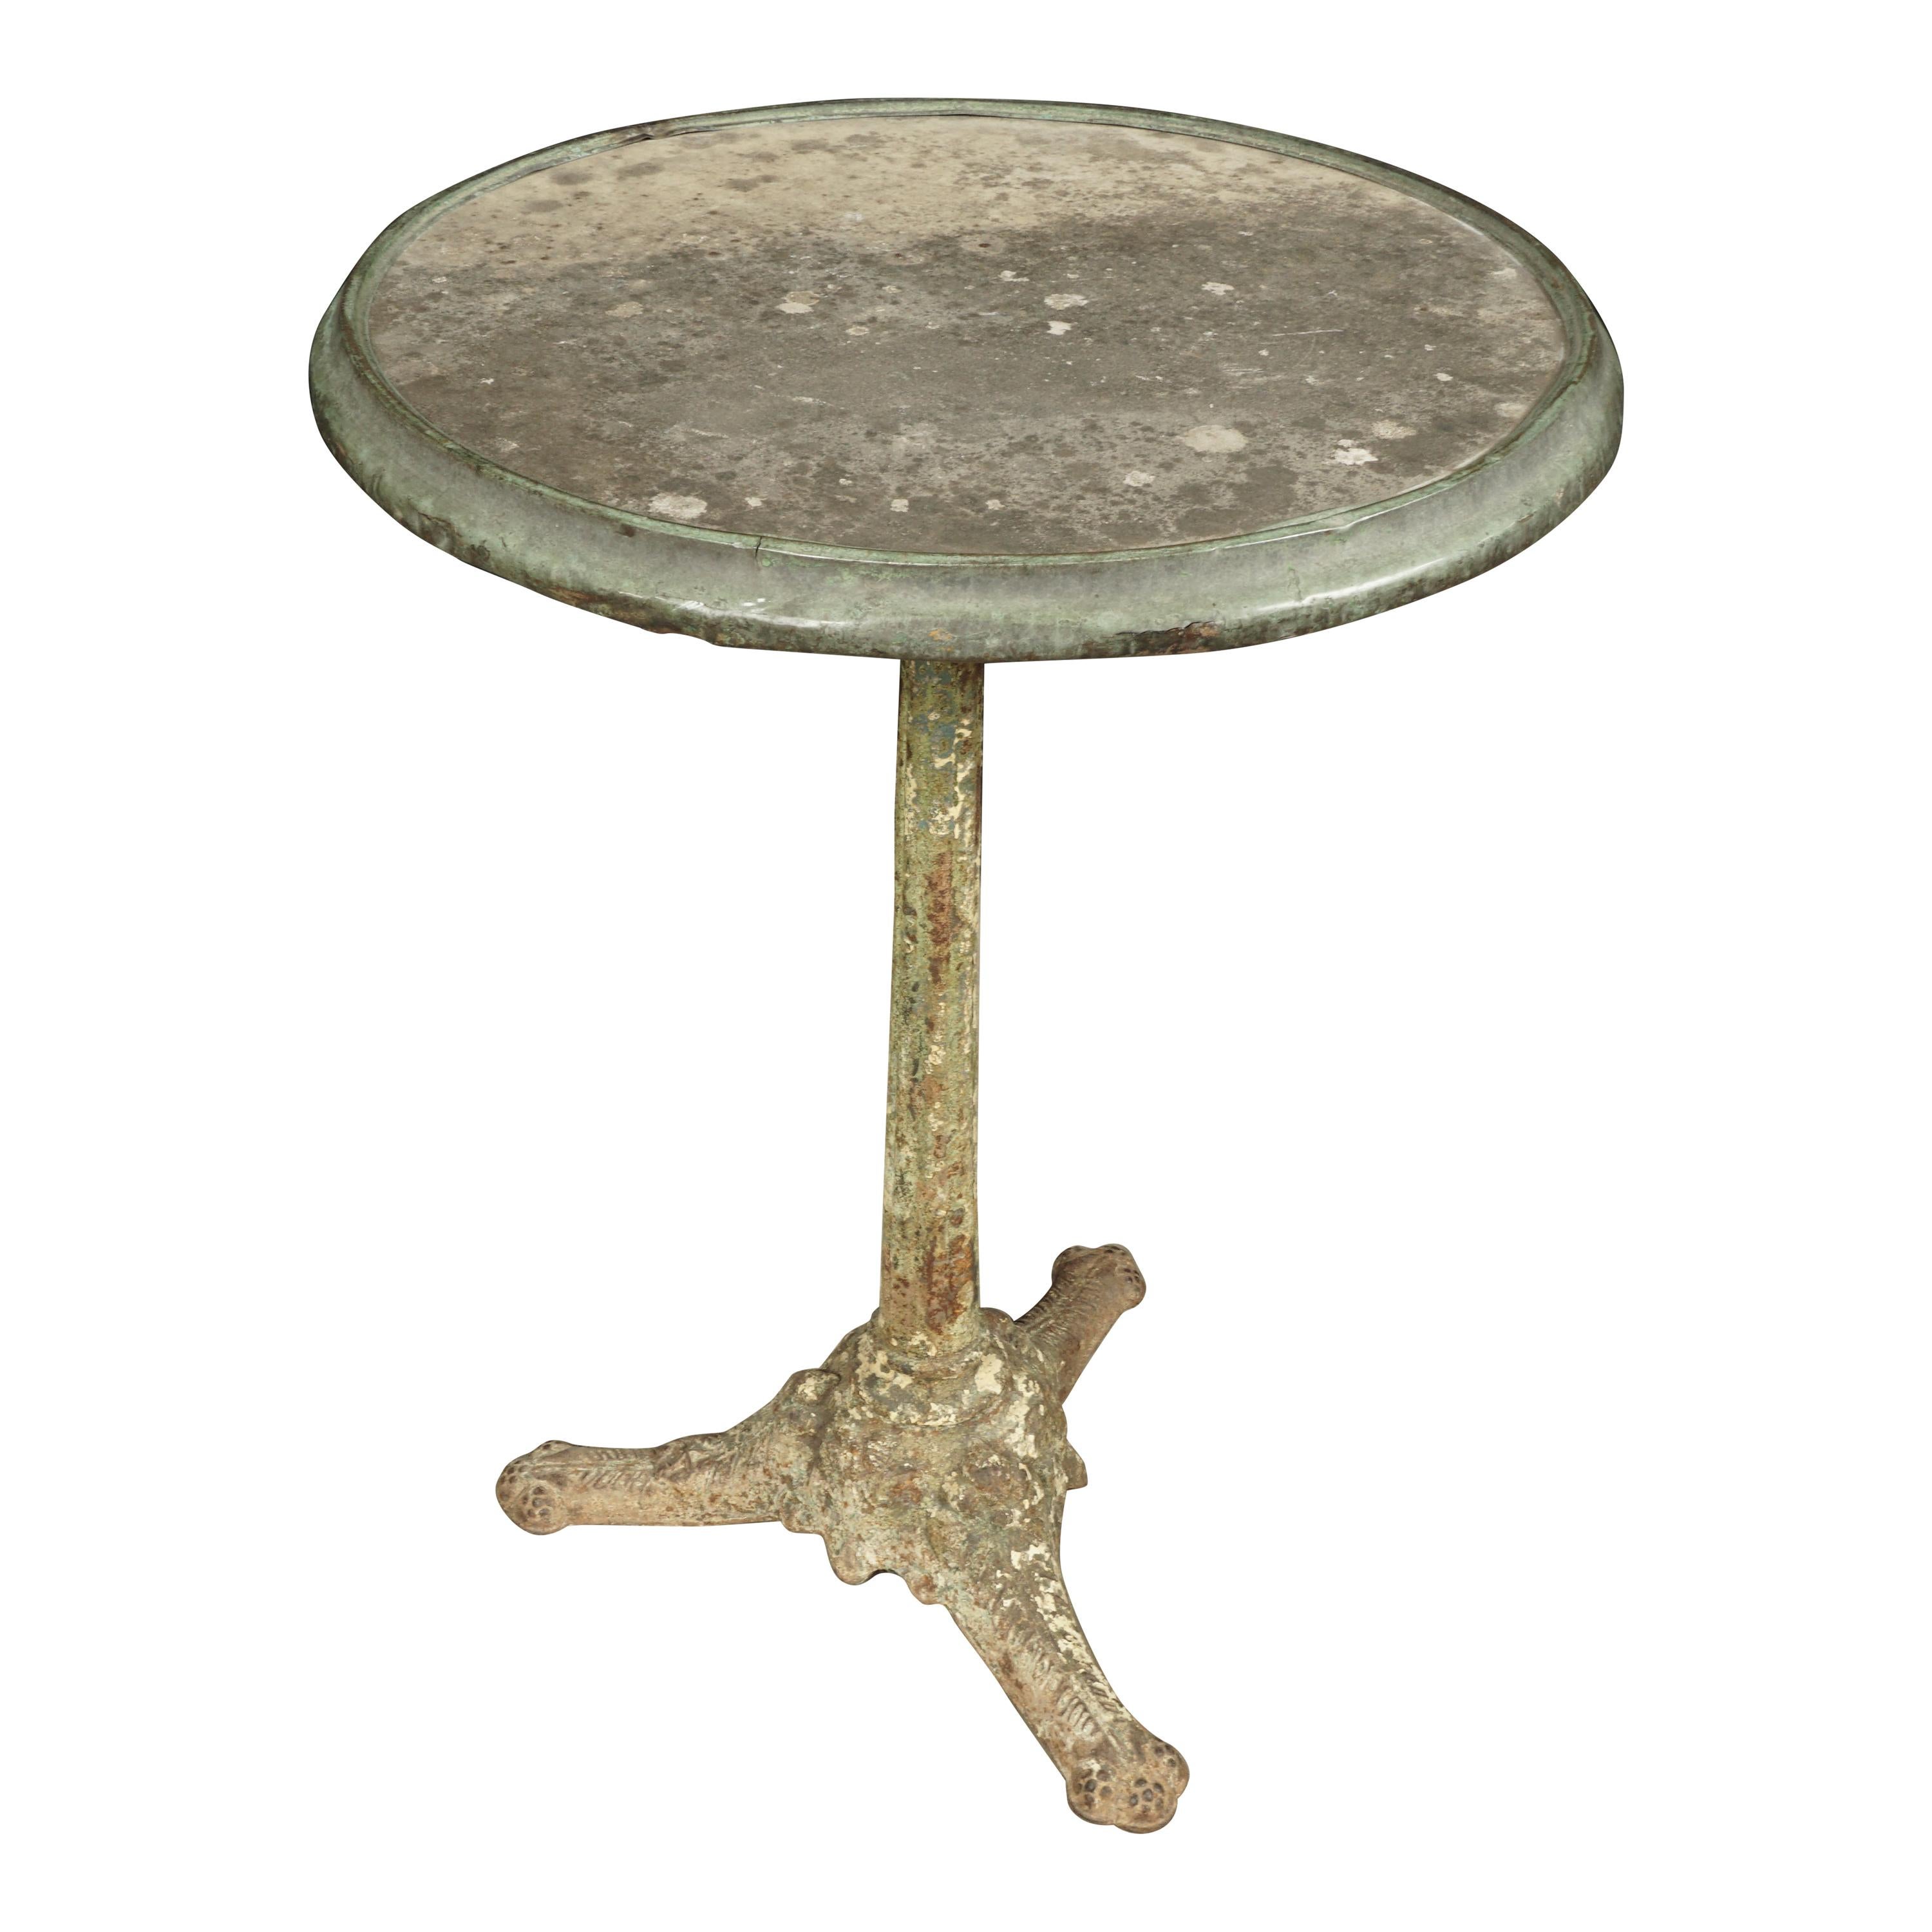 Vintage Cast Iron Bistro Table from France, 1930s